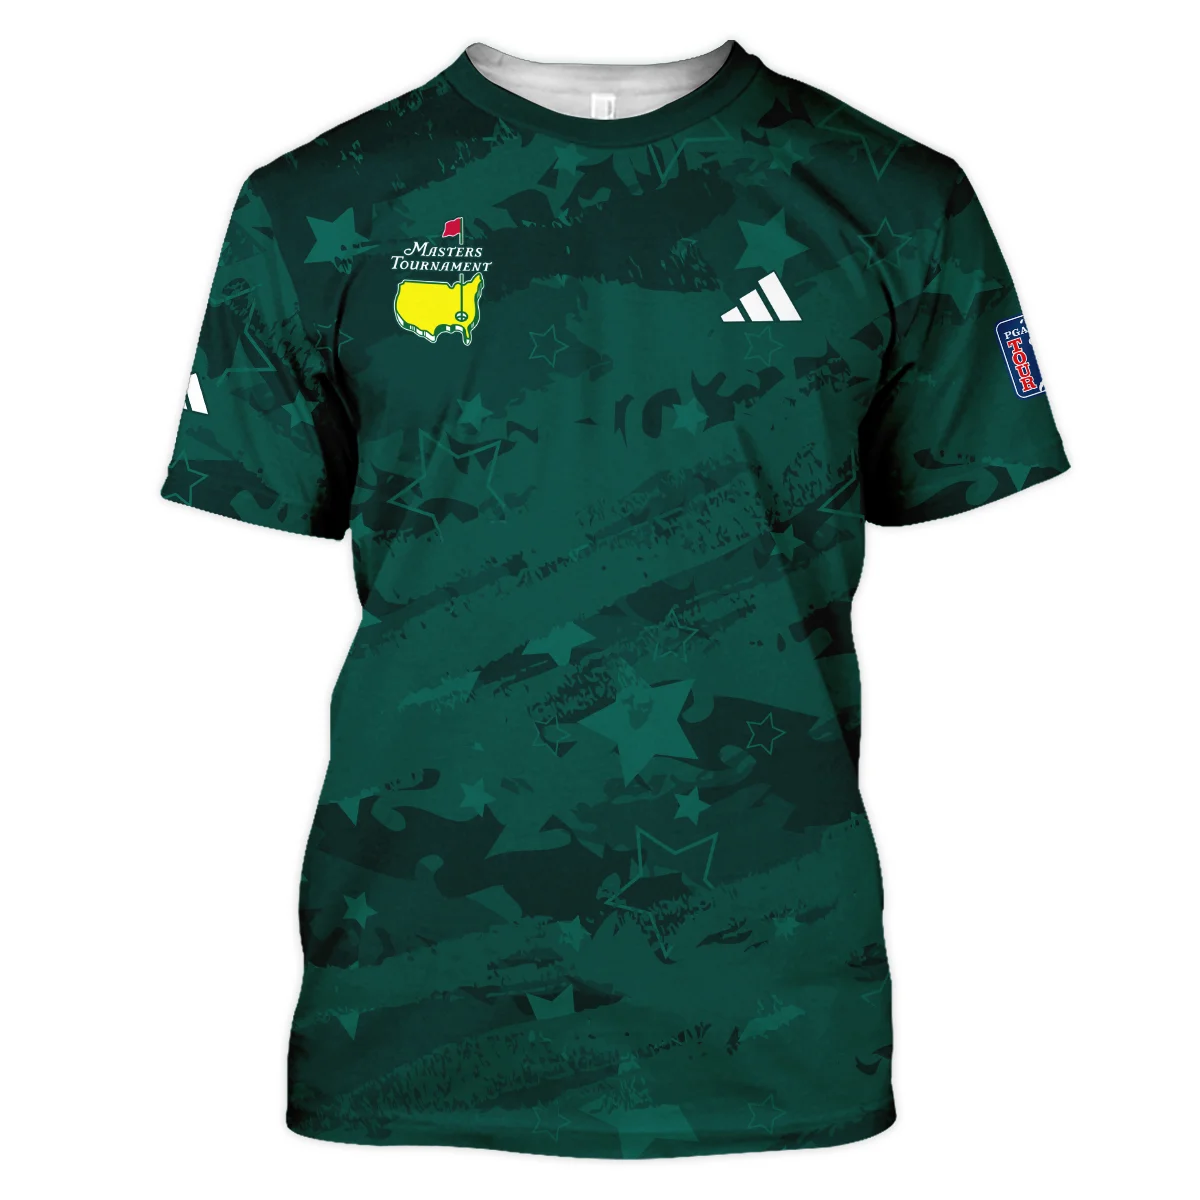 Dark Green Stars Pattern Grunge Background Masters Tournament Adidas Vneck Polo Shirt Style Classic Polo Shirt For Men